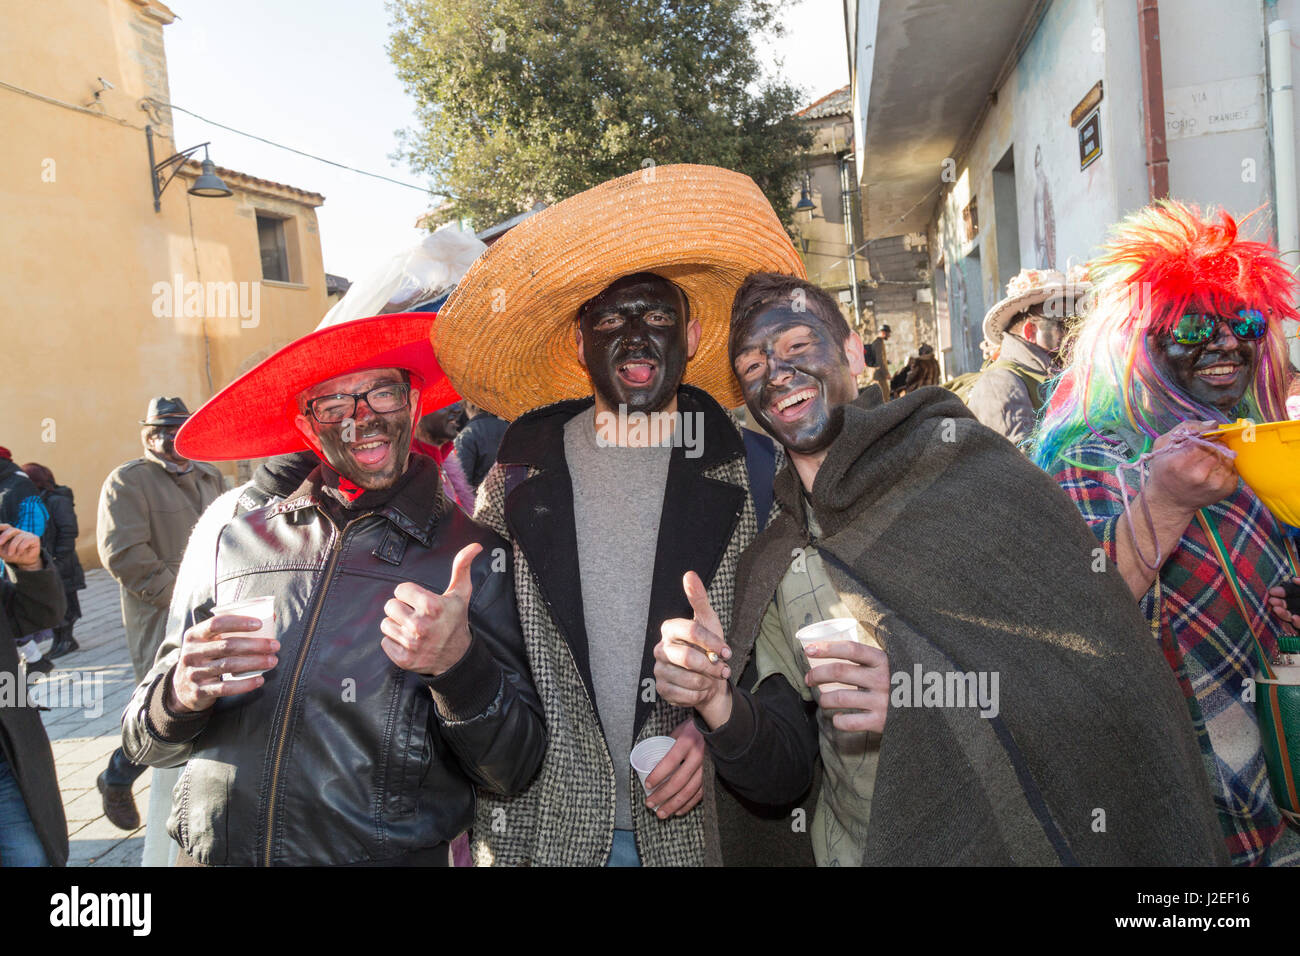 Italy, Sardinia, Ovodda. Costumed men with black painted faces at a pagan celebration. Stock Photo